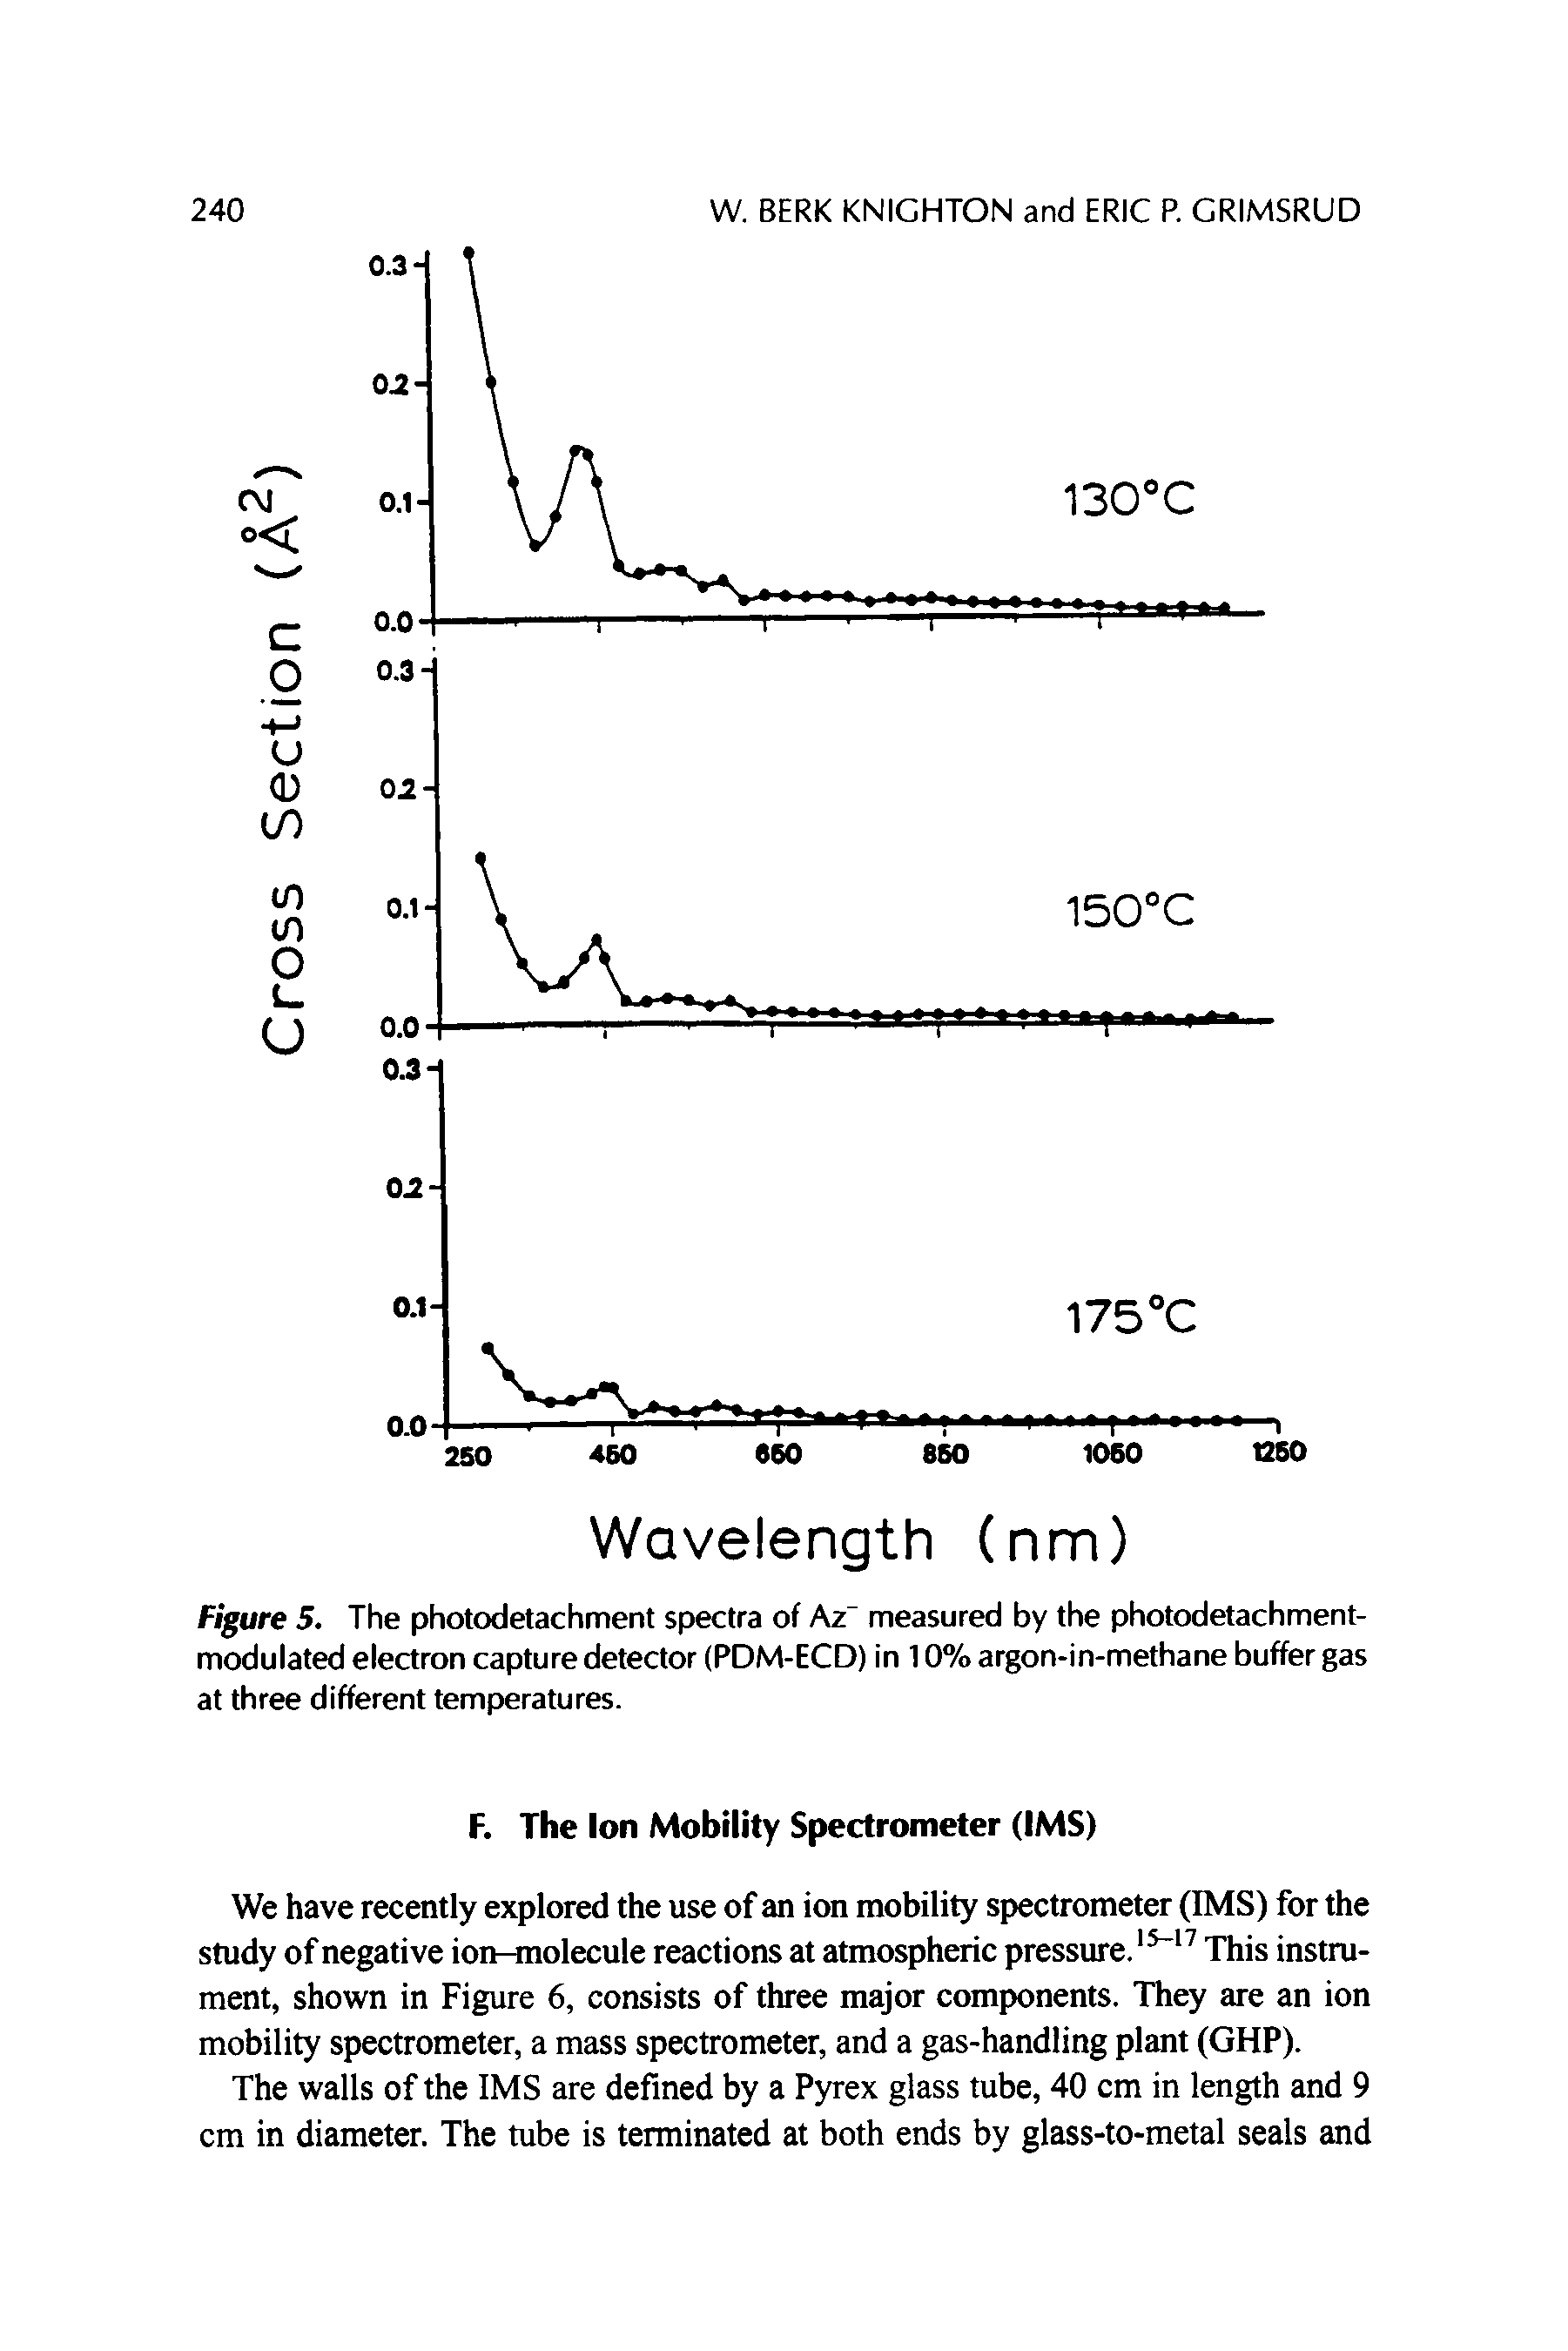 Figure 5. The photodetachment spectra of Az measured by the photodetachment-modulated electron capture detector (PDM-ECD) in 10% argon-in-methane buffer gas at three different temperatures.